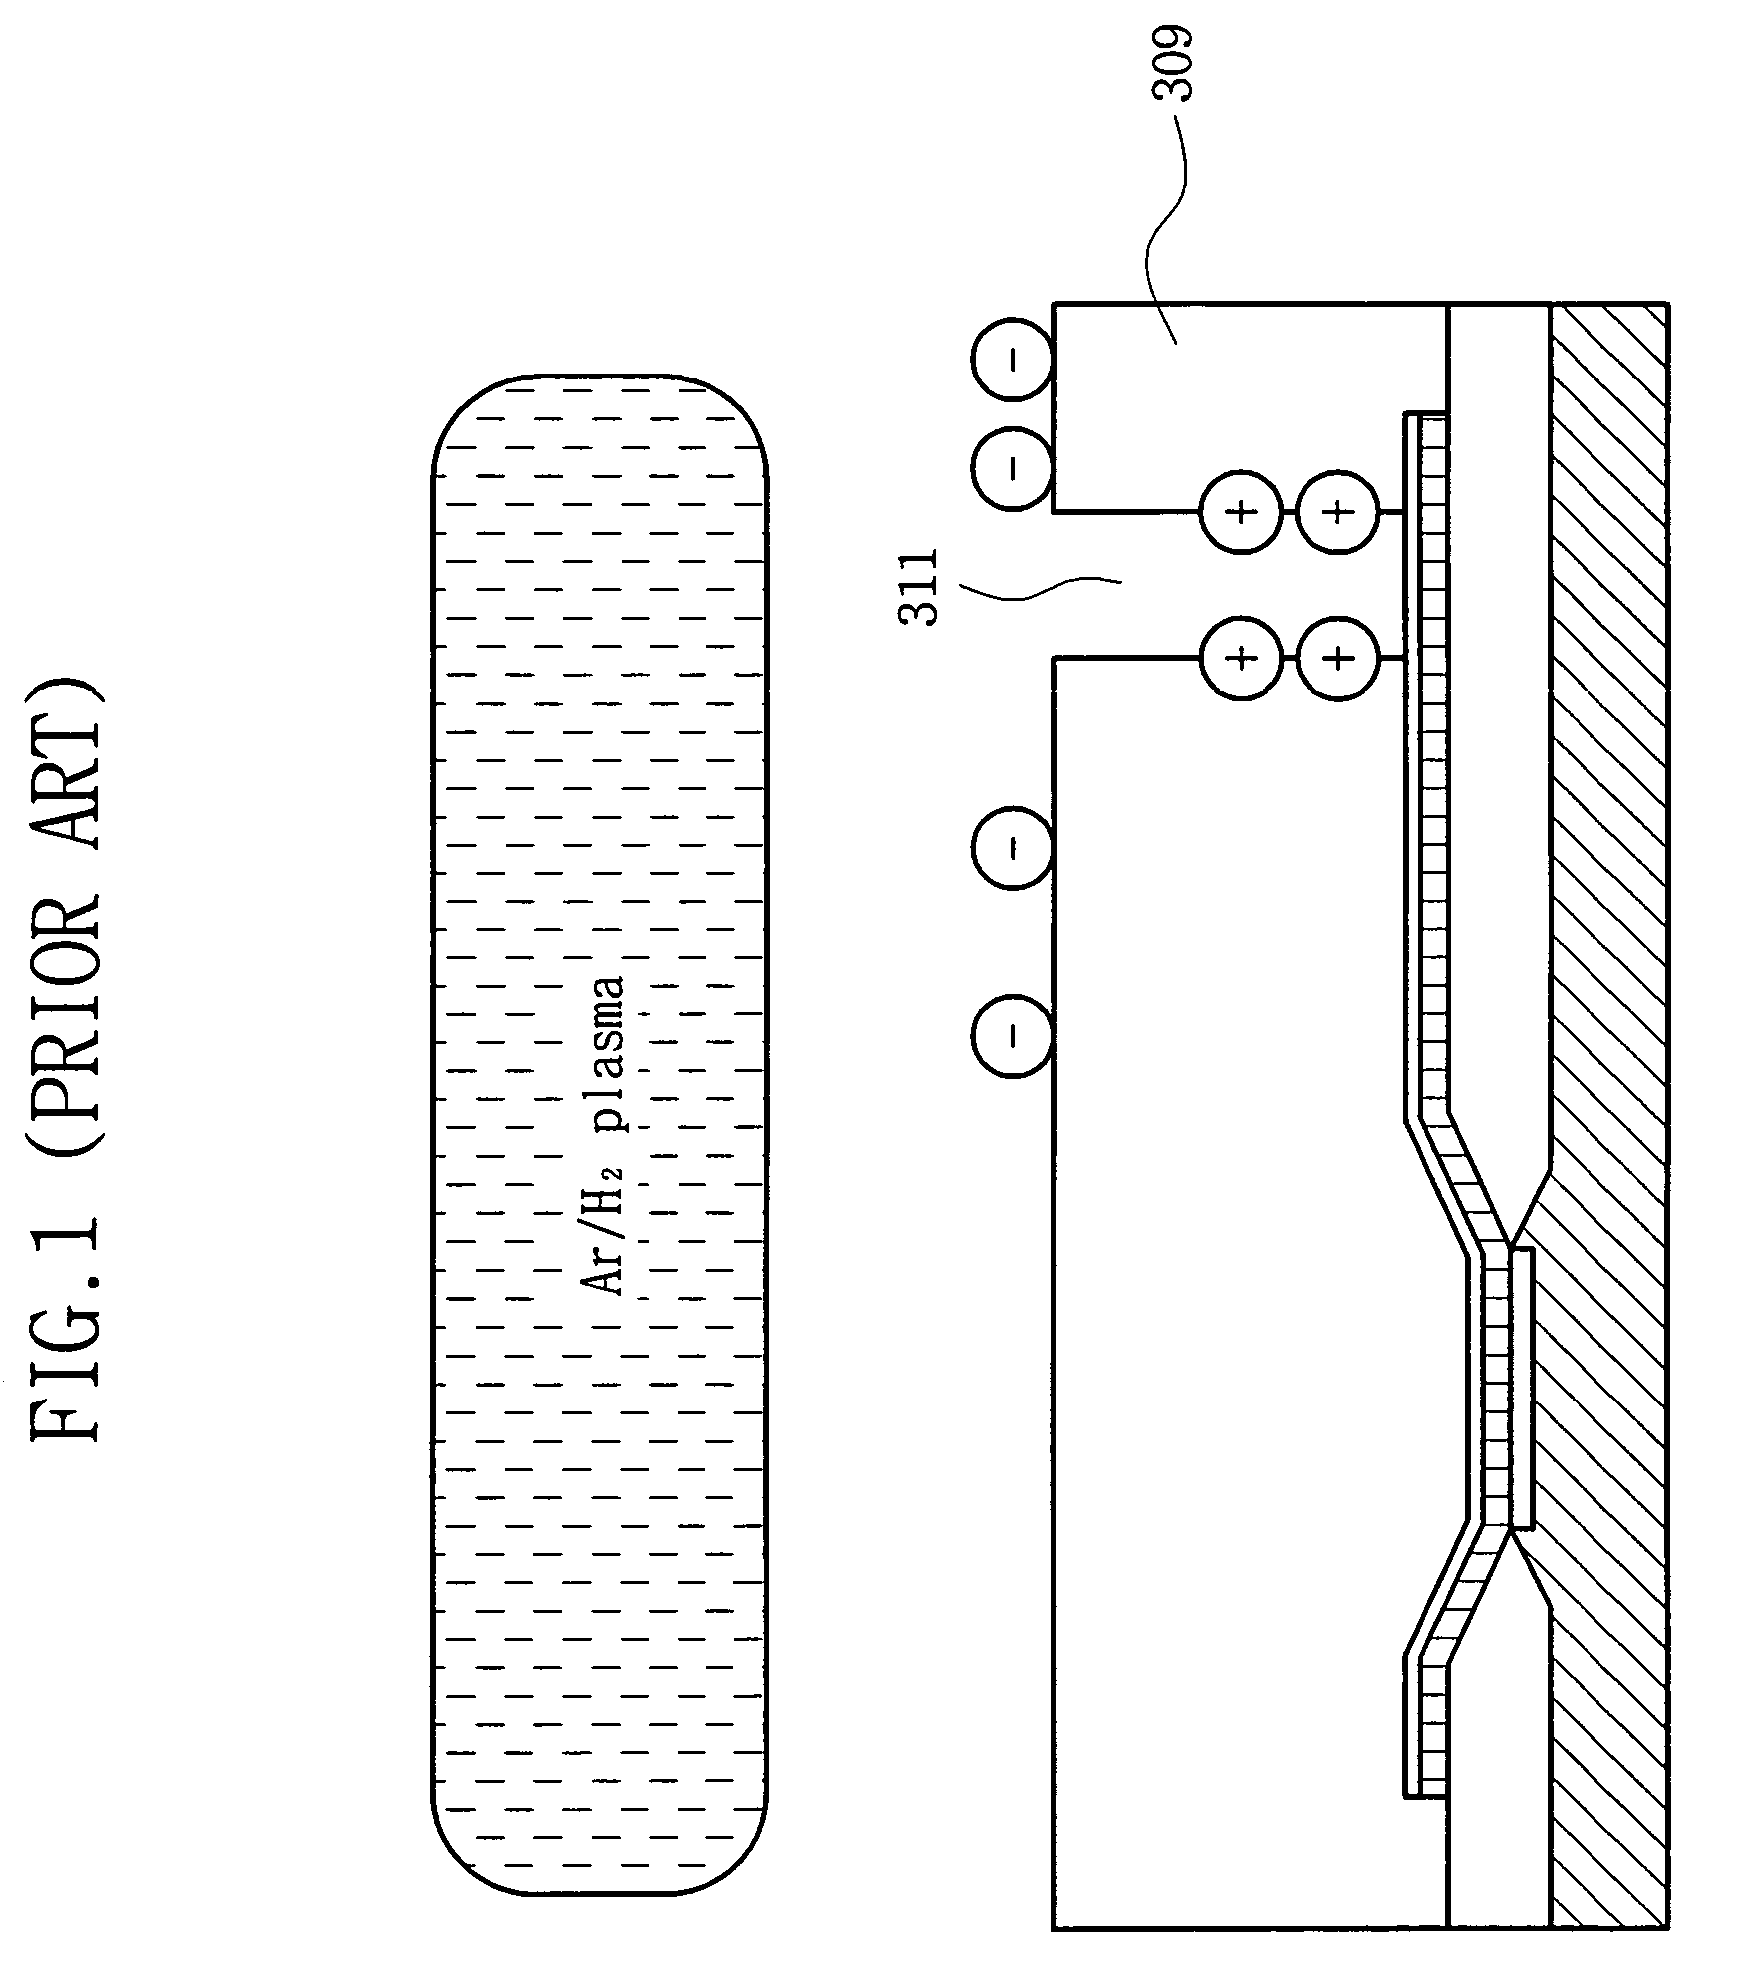 Method of forming metal layer used in the fabrication of semiconductor device